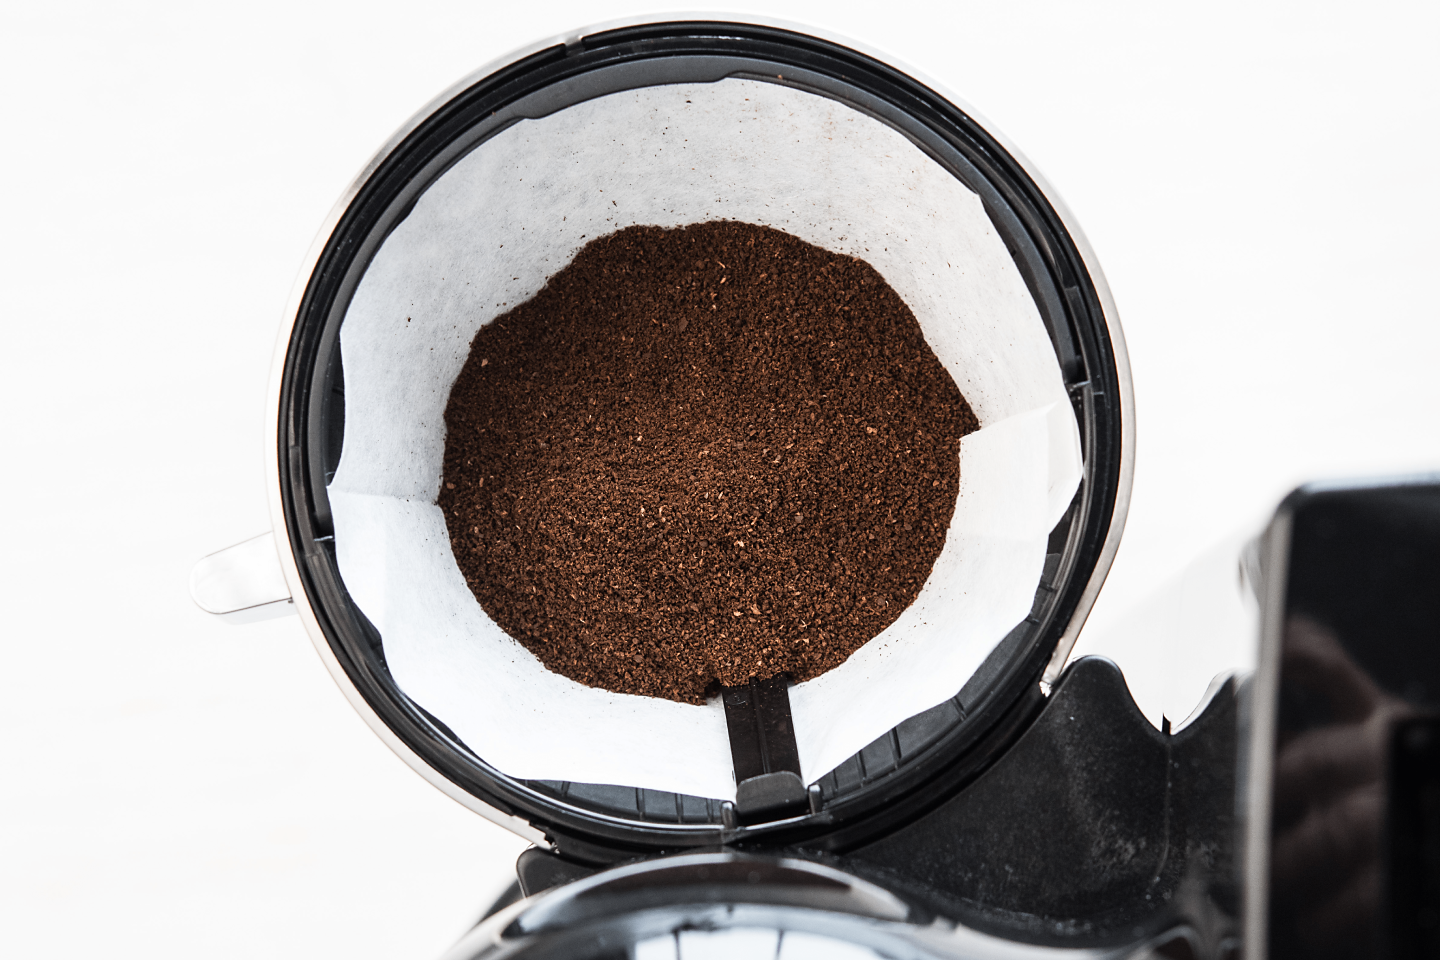 Fresh coffee beans in a coffee filter